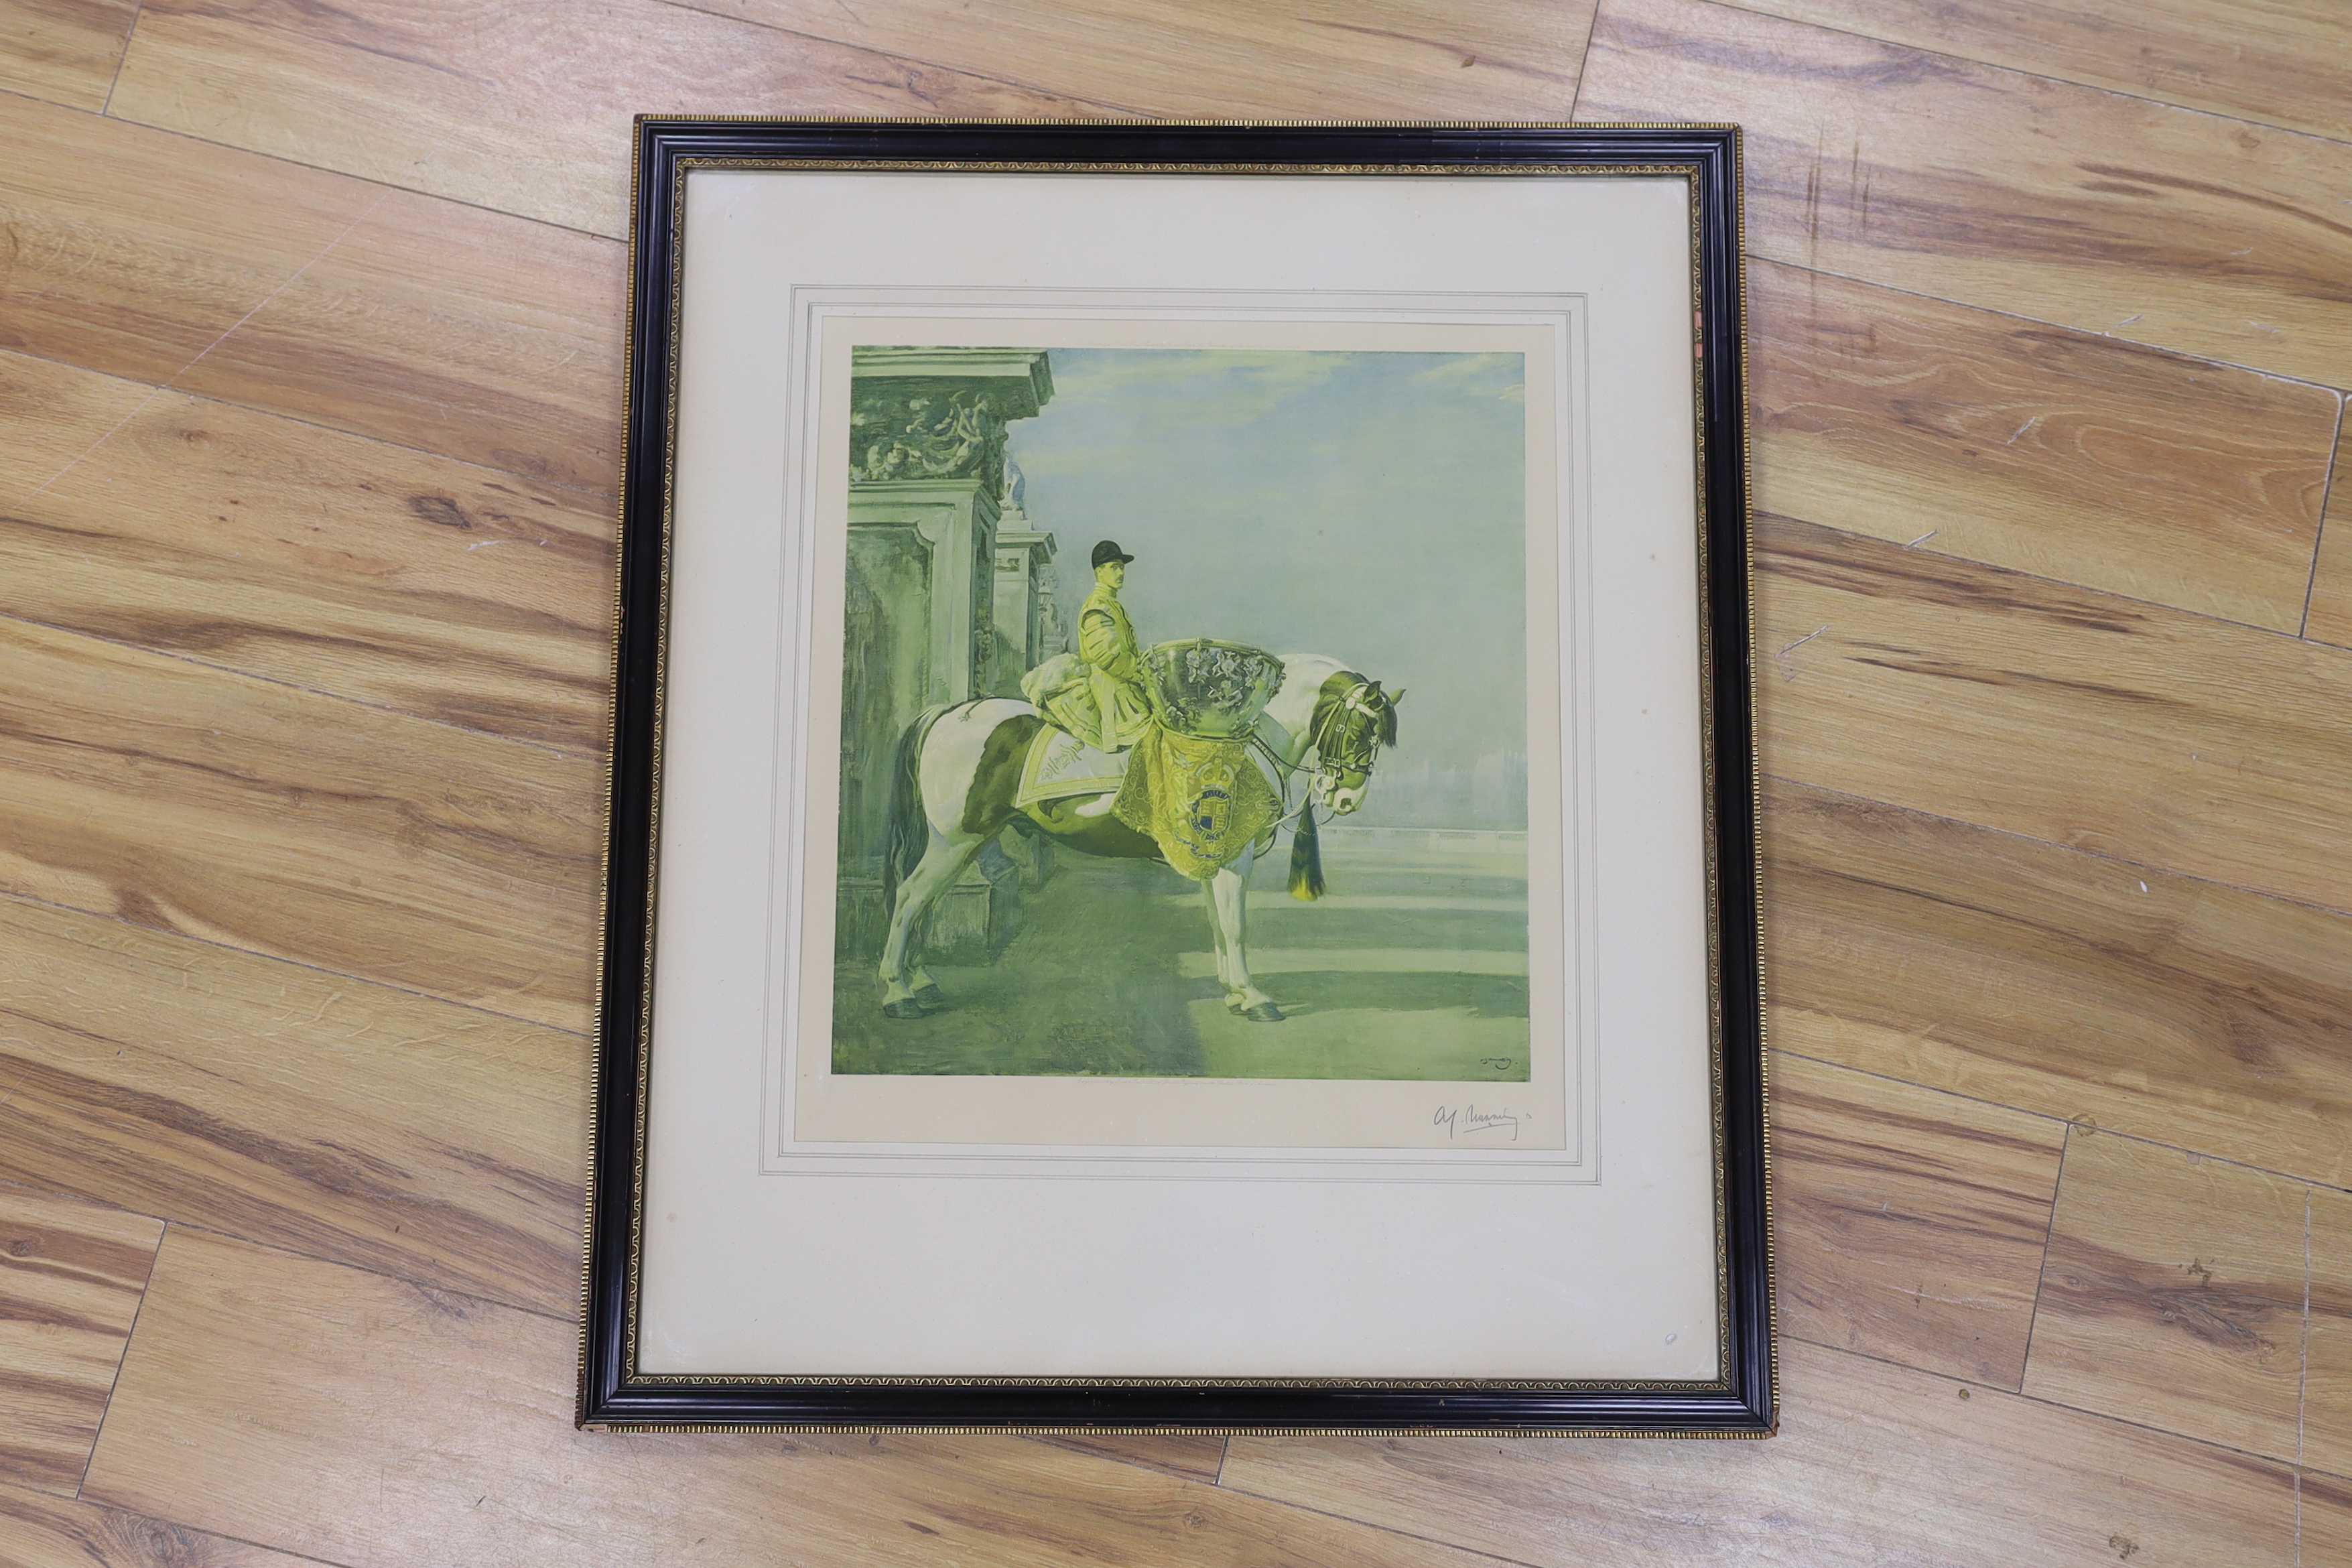 Sir Alfred James Munnings P.R.A., R.W.S. (British, 1878-1959), limited edition print, ‘The Drummer’ - The Life Guards Drum Major on horseback, signed in pencil lower right, published by Frost and Reed, 1929, 49 x 43cm